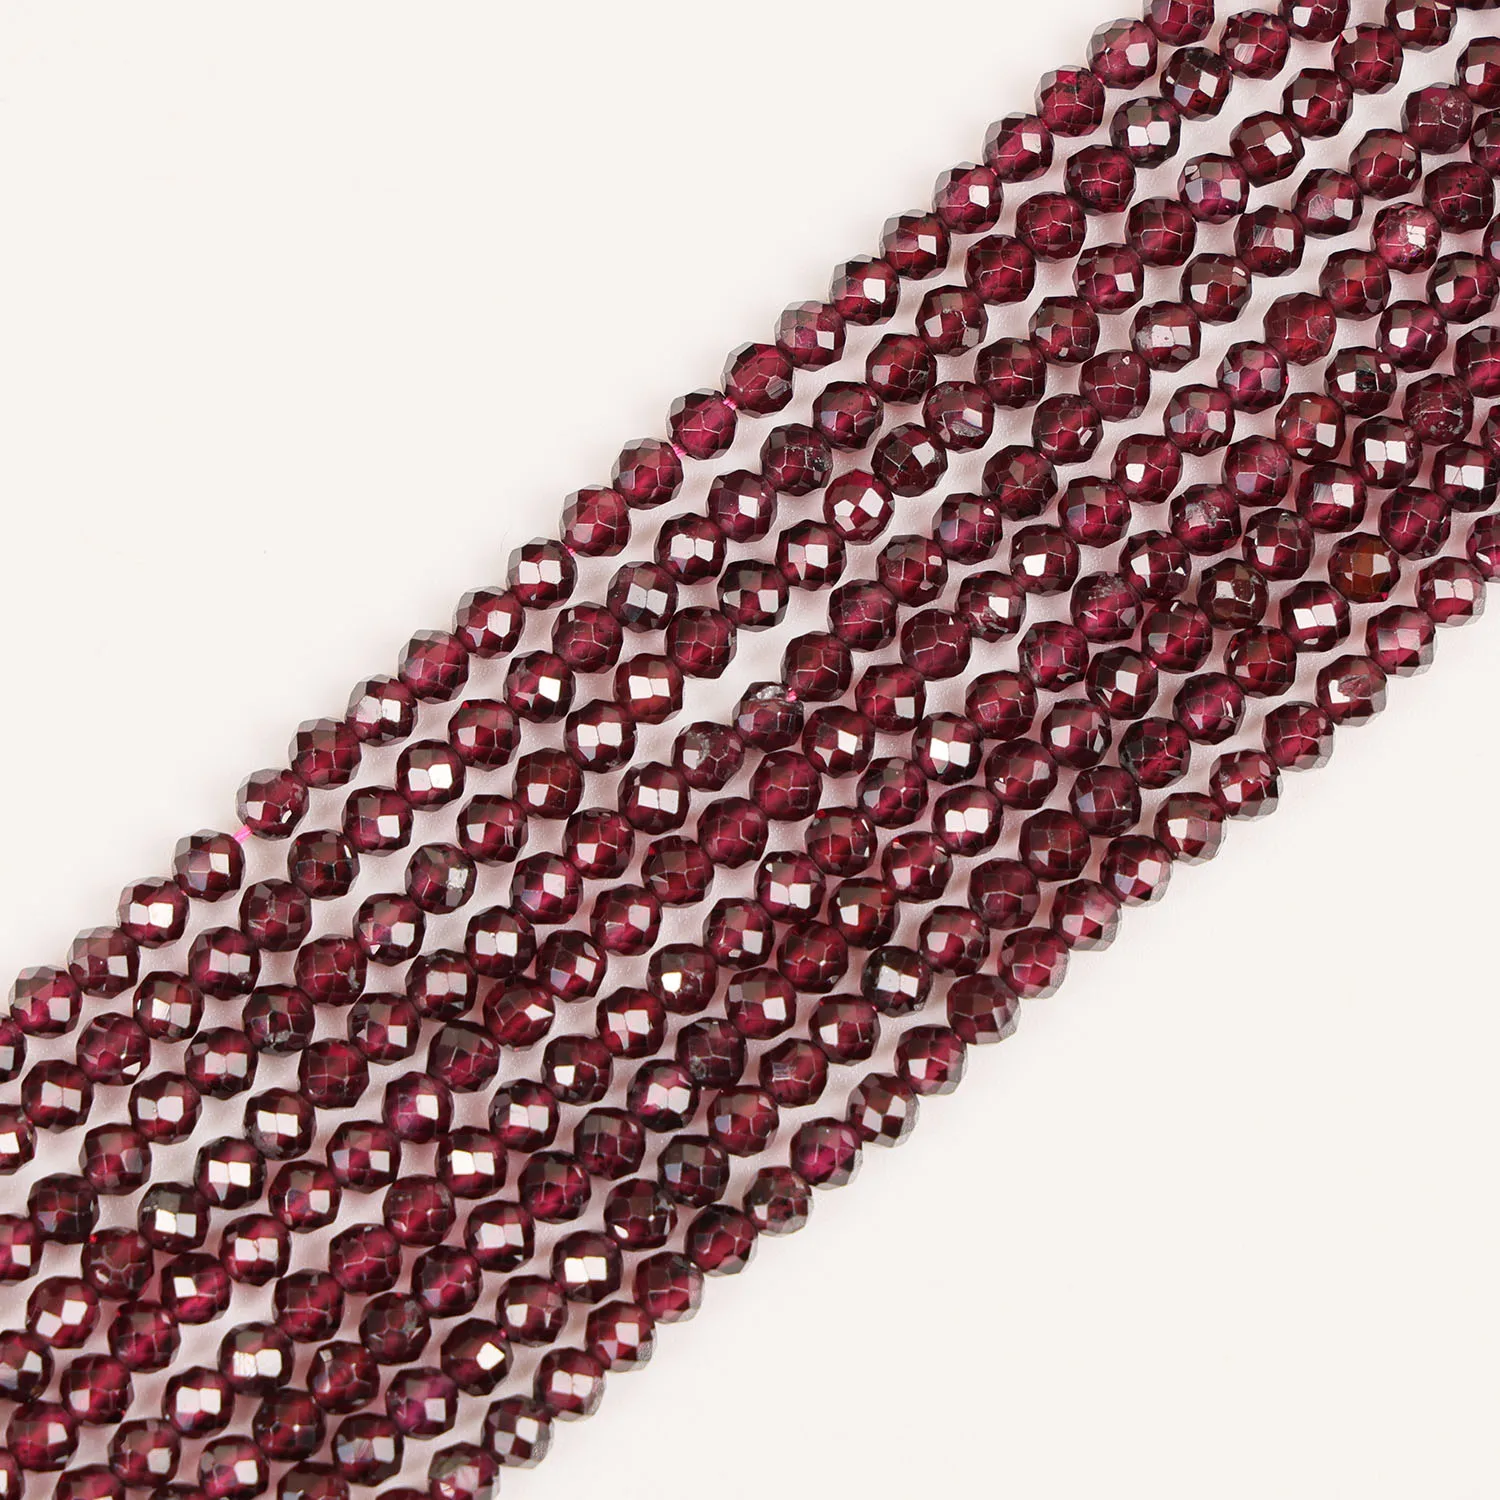 

Natural Red Garnet 2 3 4mm Round Faceted Gemstone Loose Beads Accessories for DIY Jewelry Necklace Bracelet Earring Making